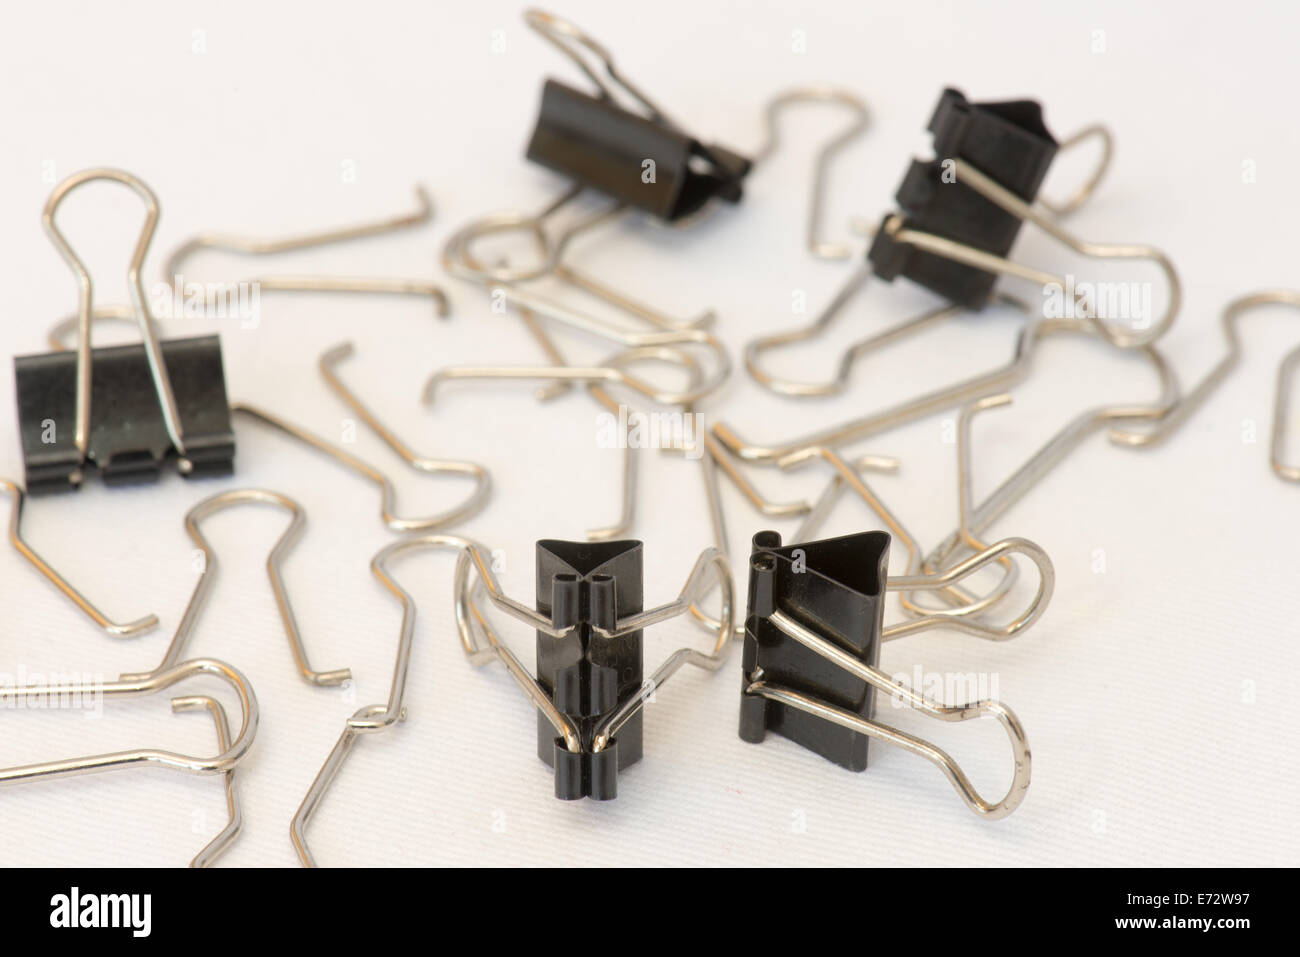 Closeup of several paper clips in different positions and arranged randomly. Stock Photo